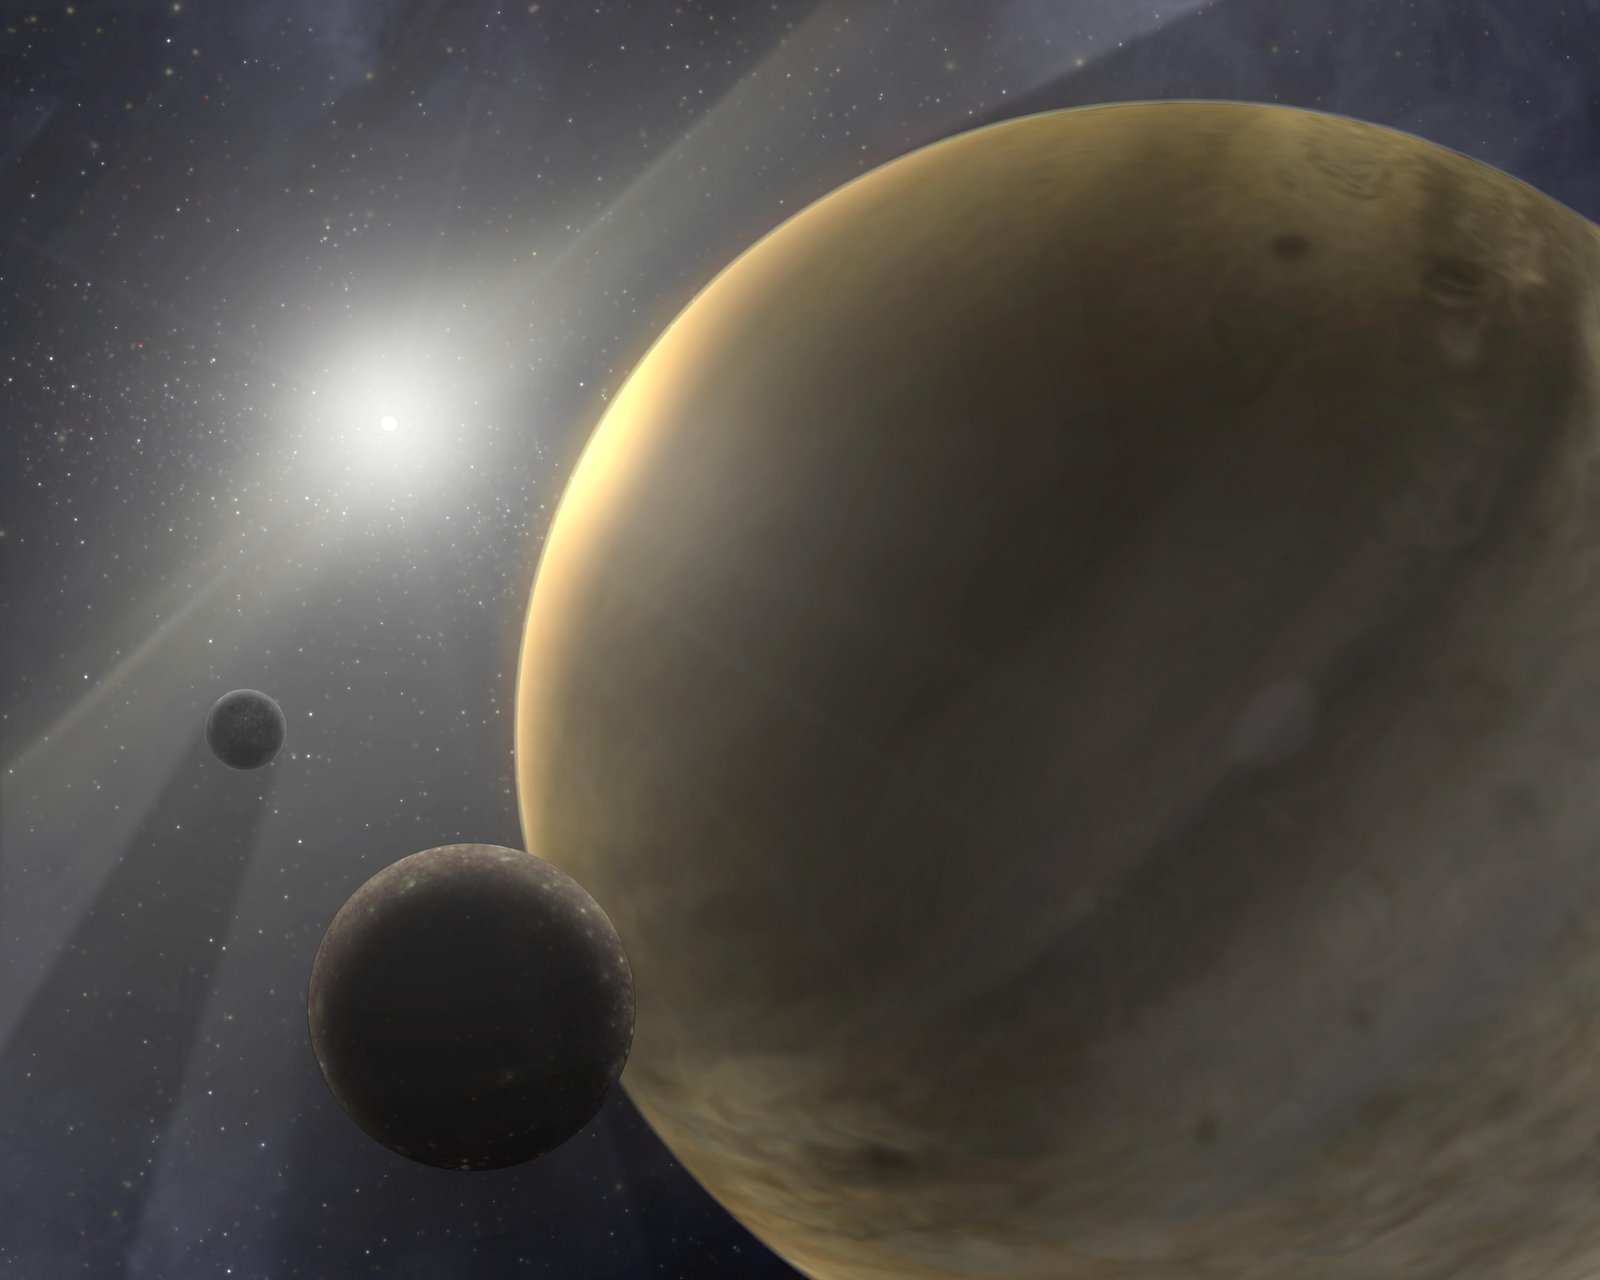 Three planets and a bright star appear against a backdrop of pinpricks of light of distant stars. The largest, a light-brown orb with the swirly appearance of a gas giant, fills the right hand side of the frame. In the lower left, just in front of the big light brown body, we see a smaller, darker body, its top surface lit by the light from the bright star in the upper left. The third planetary body, the smallest yet, lies between the smaller body and the star. It casts a long shadow across the dust of space.